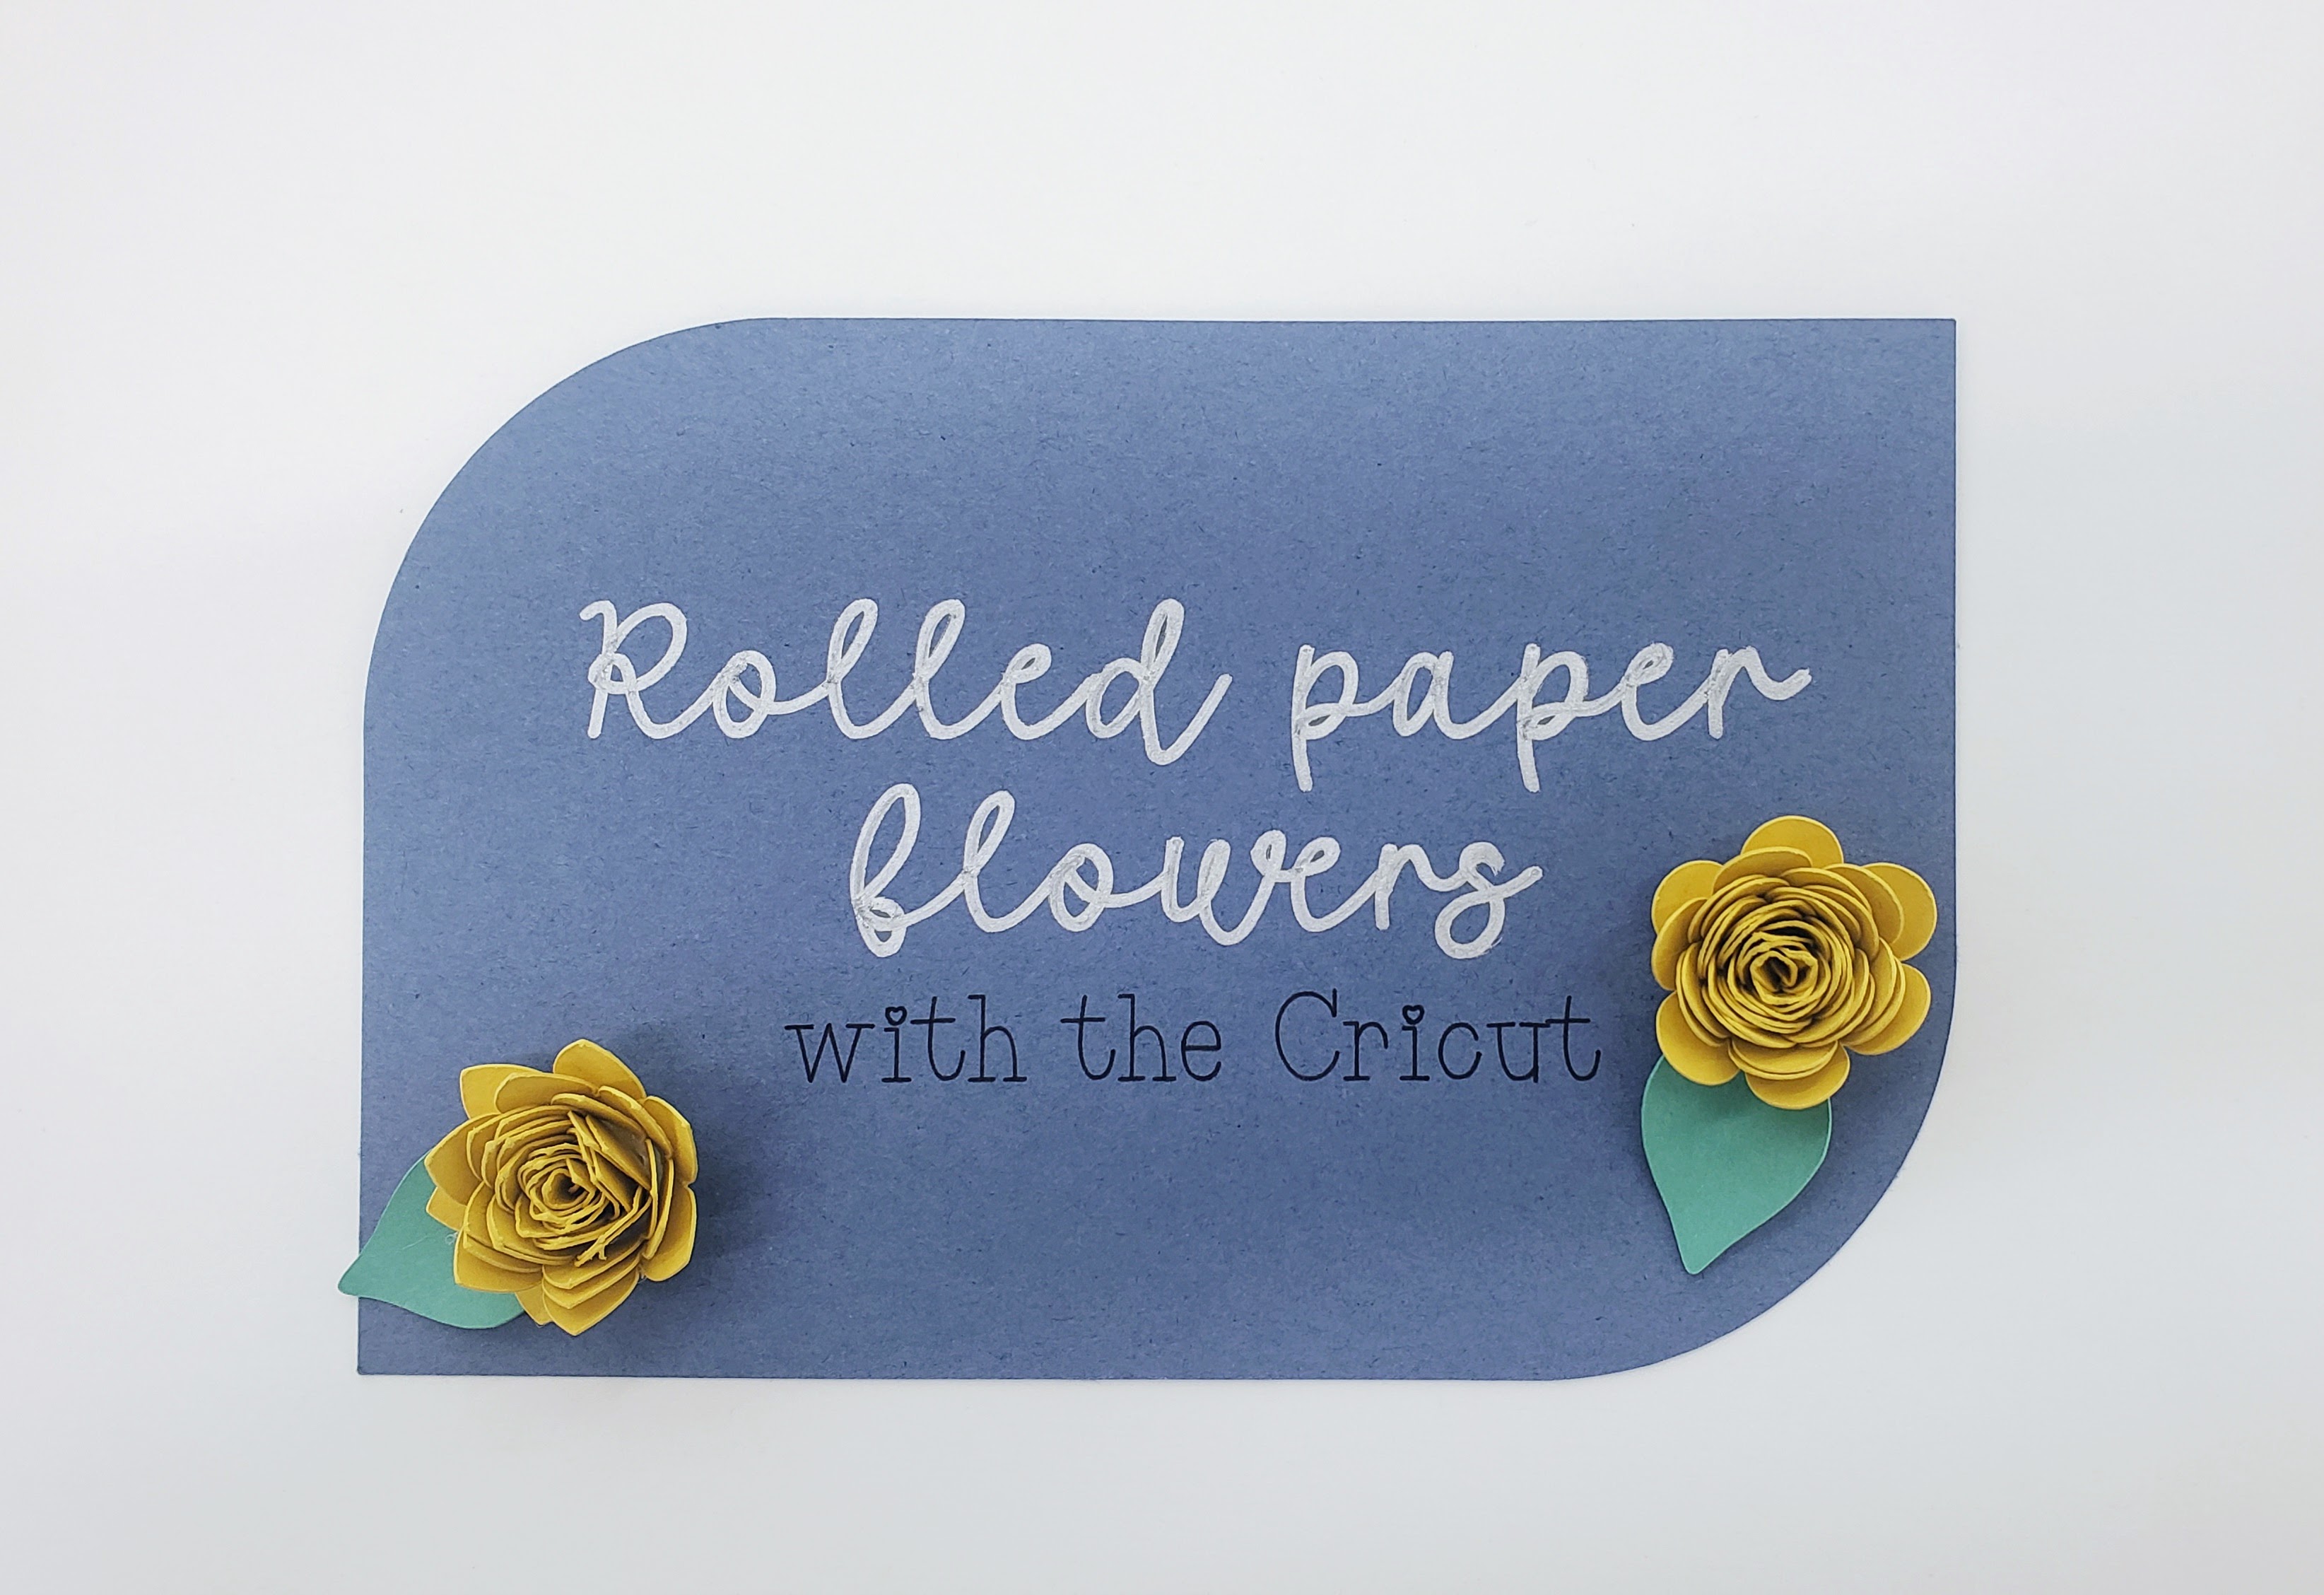 Blue background with yeloow paper flowers and the text Rolled Paper flowers with the cricut written in silver and black